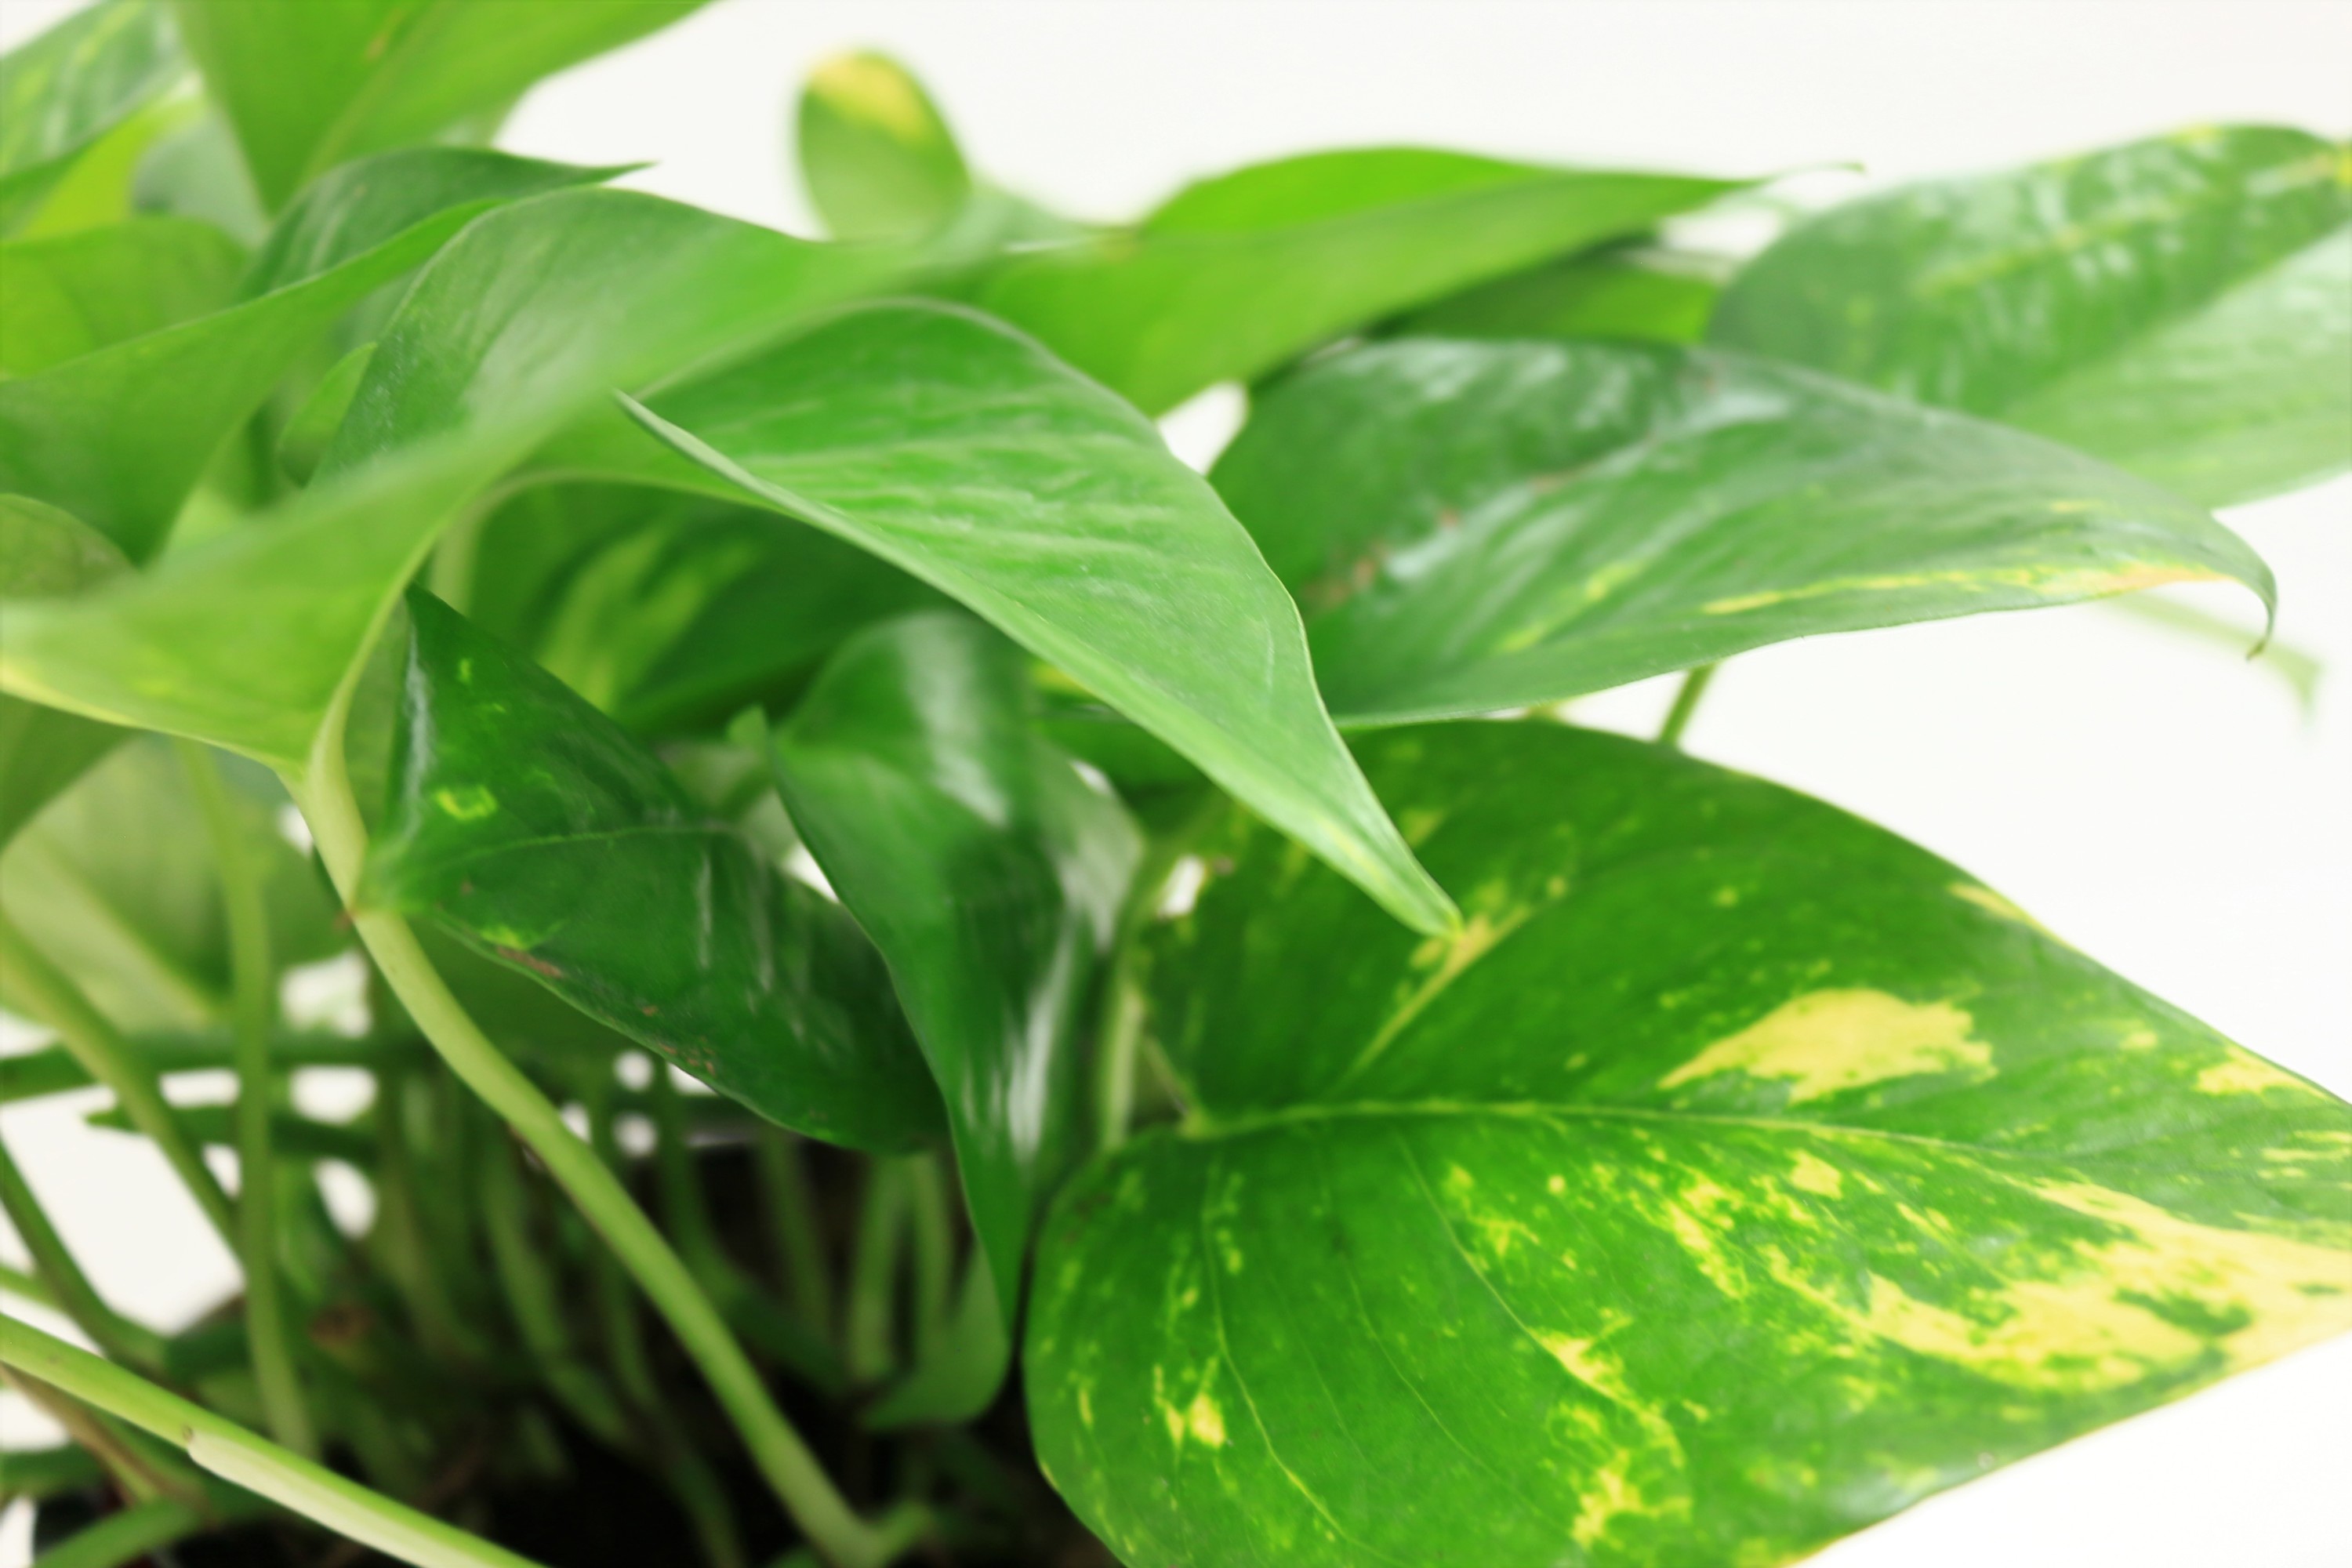 Costa Farms Live Indoor 10in. Tall Devil's Ivy Pothos; Medium, Indirect Light Plant in 6in. Grower Pot - image 3 of 11